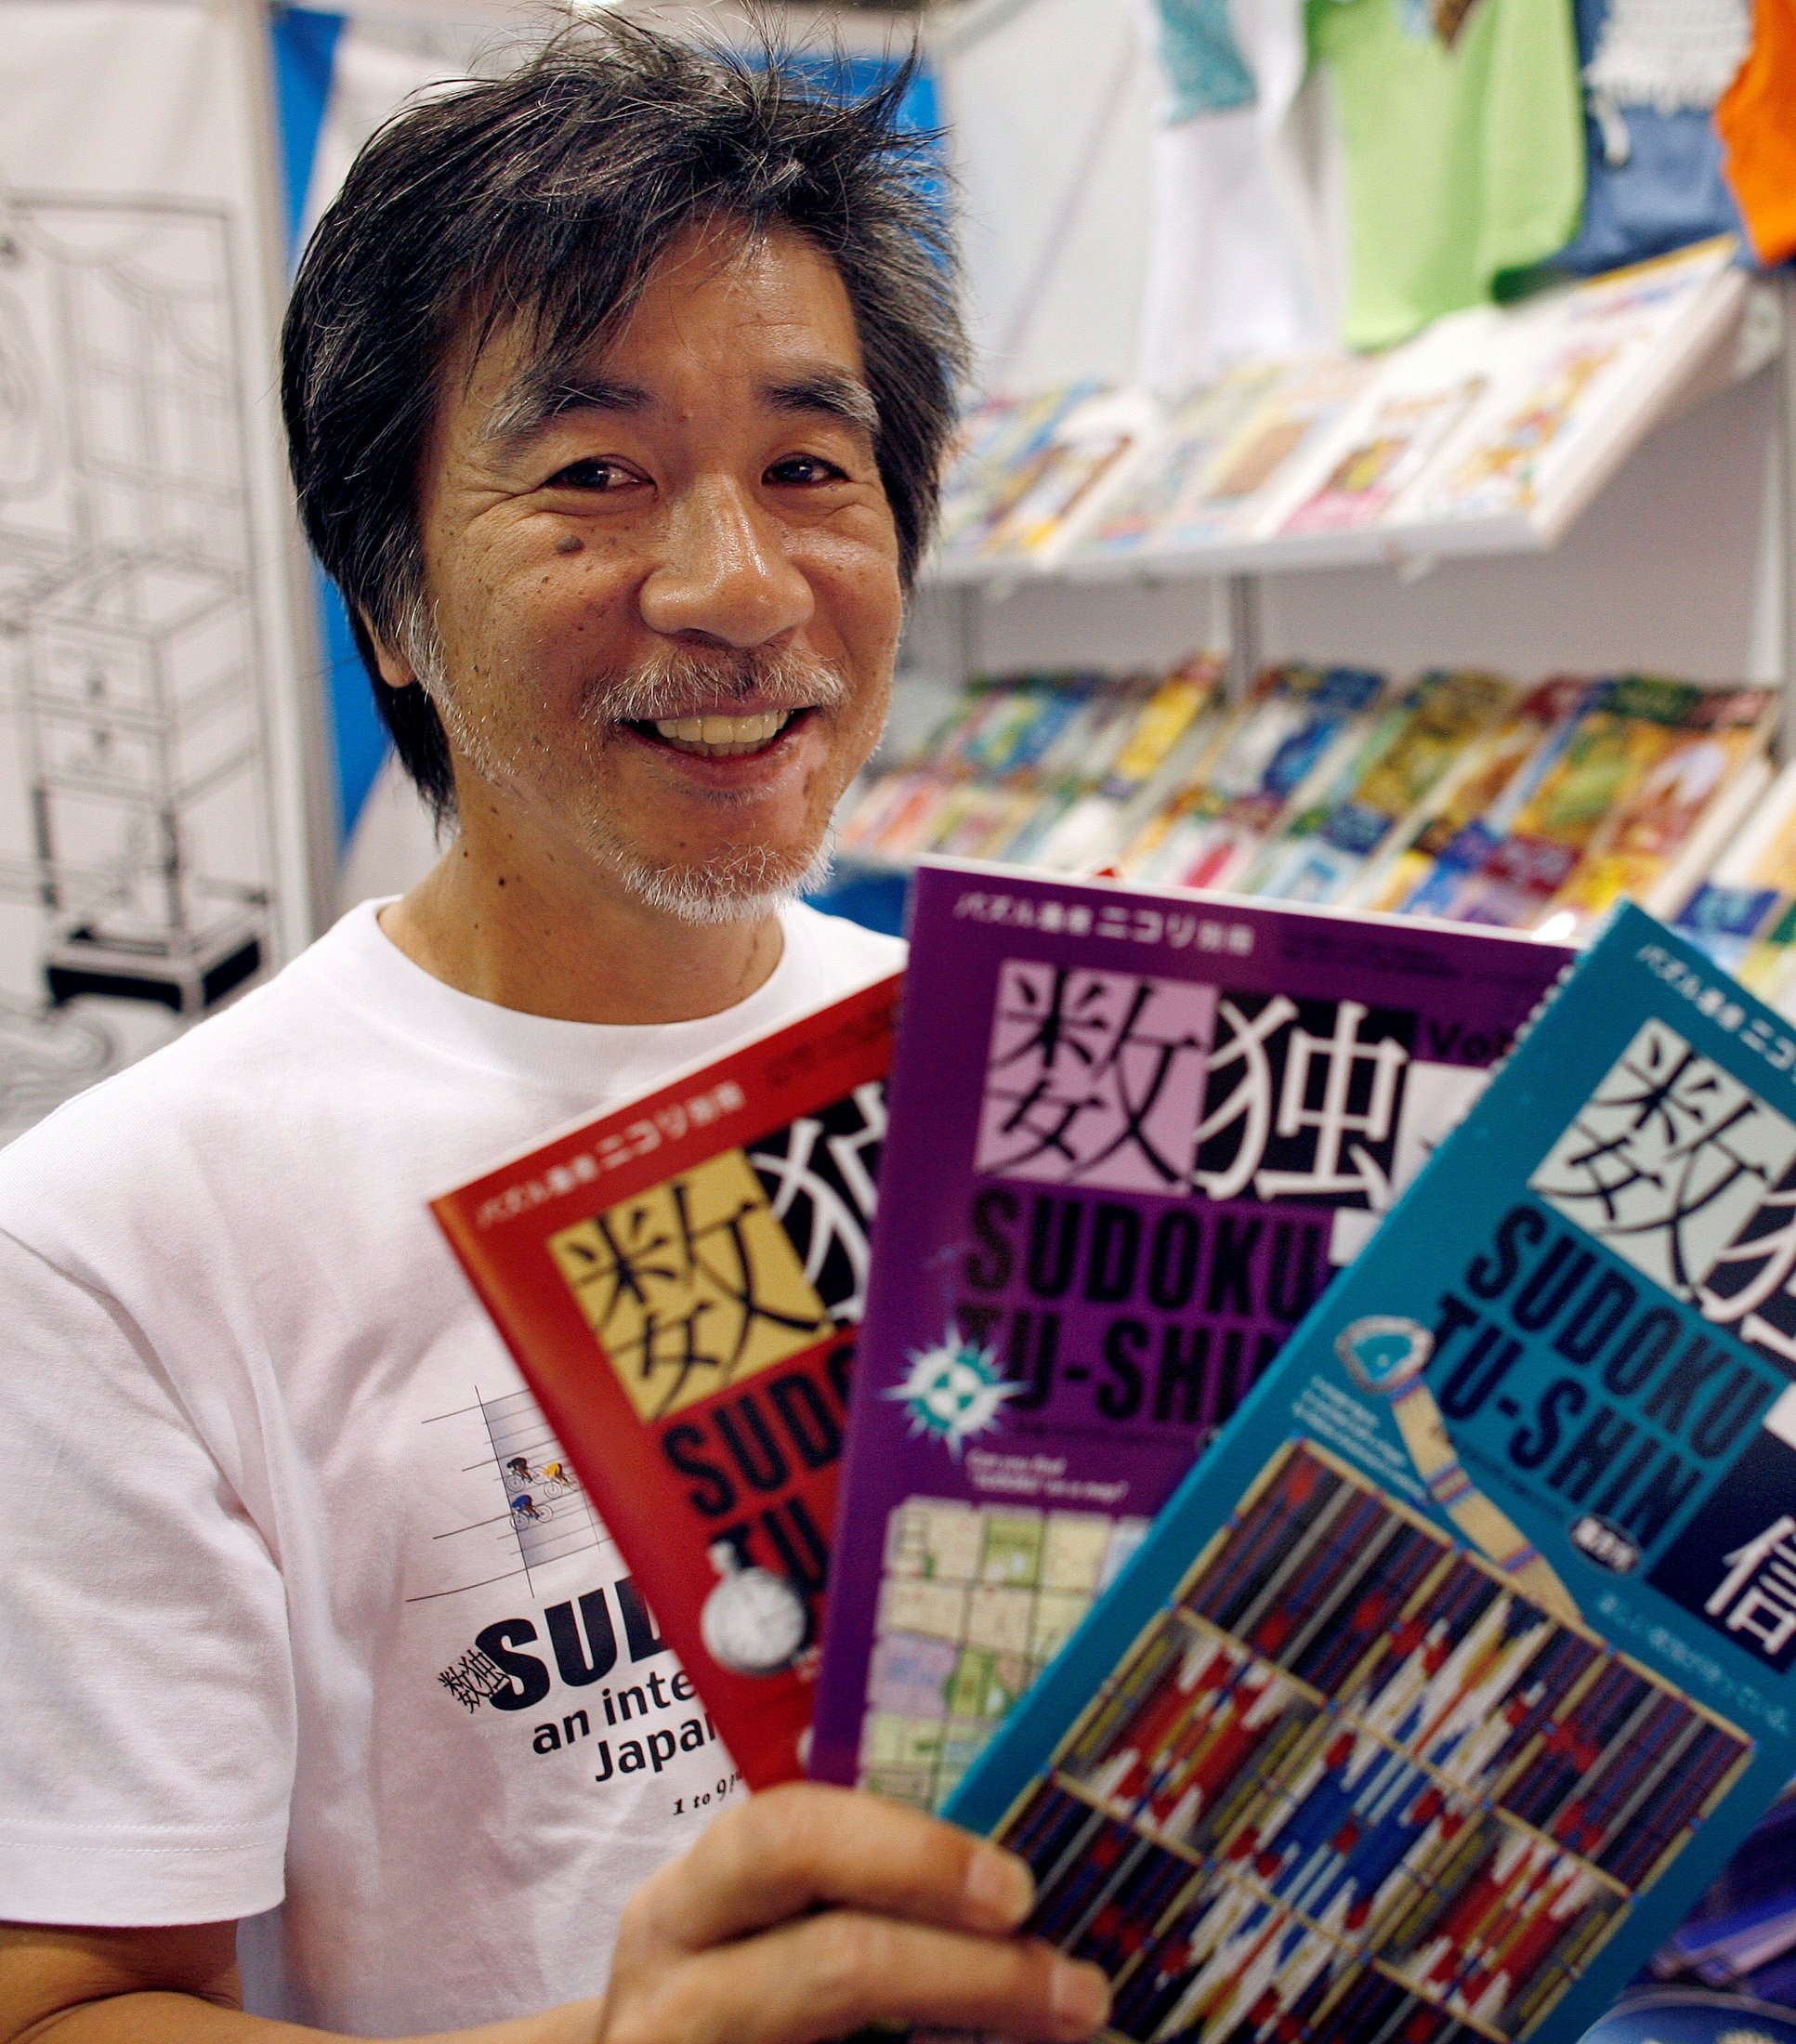  'Father of Sudoku' Maki Kaji holds copies of the latest sudoku puzzles at the Book Expo, in New York, June 3, 2007. (Reuters Photo) 